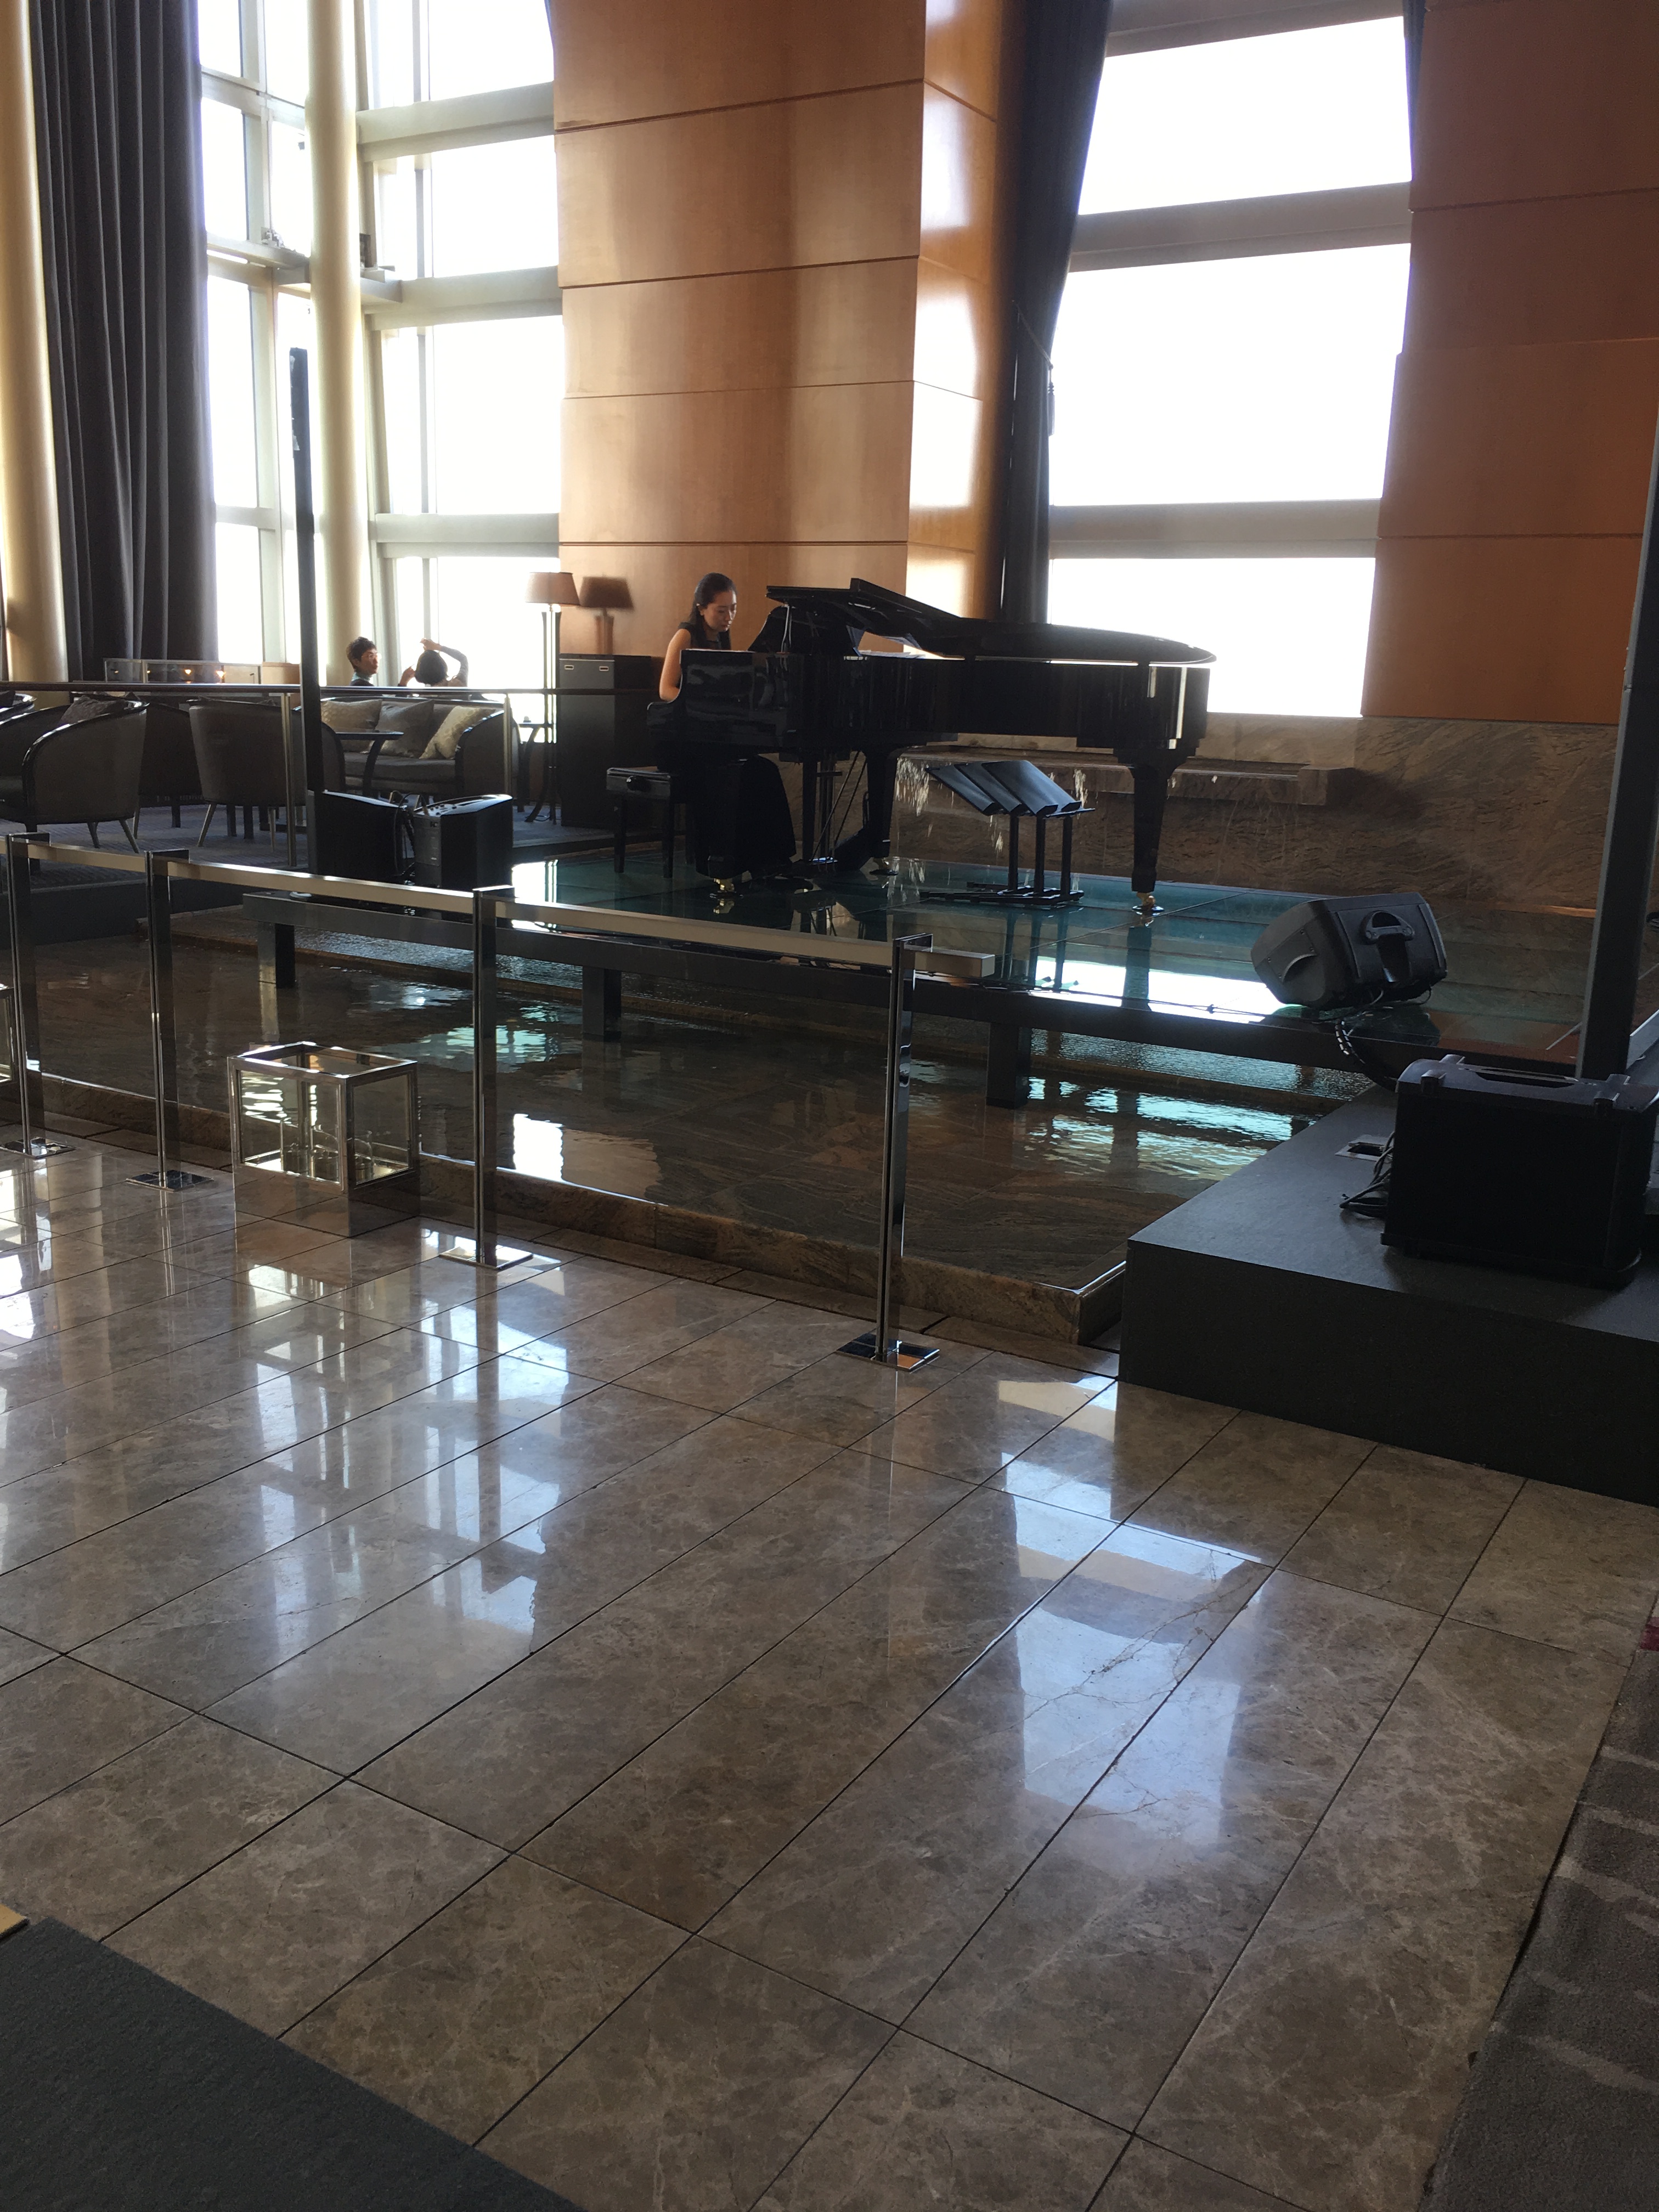 Live piano music on the 45th floor